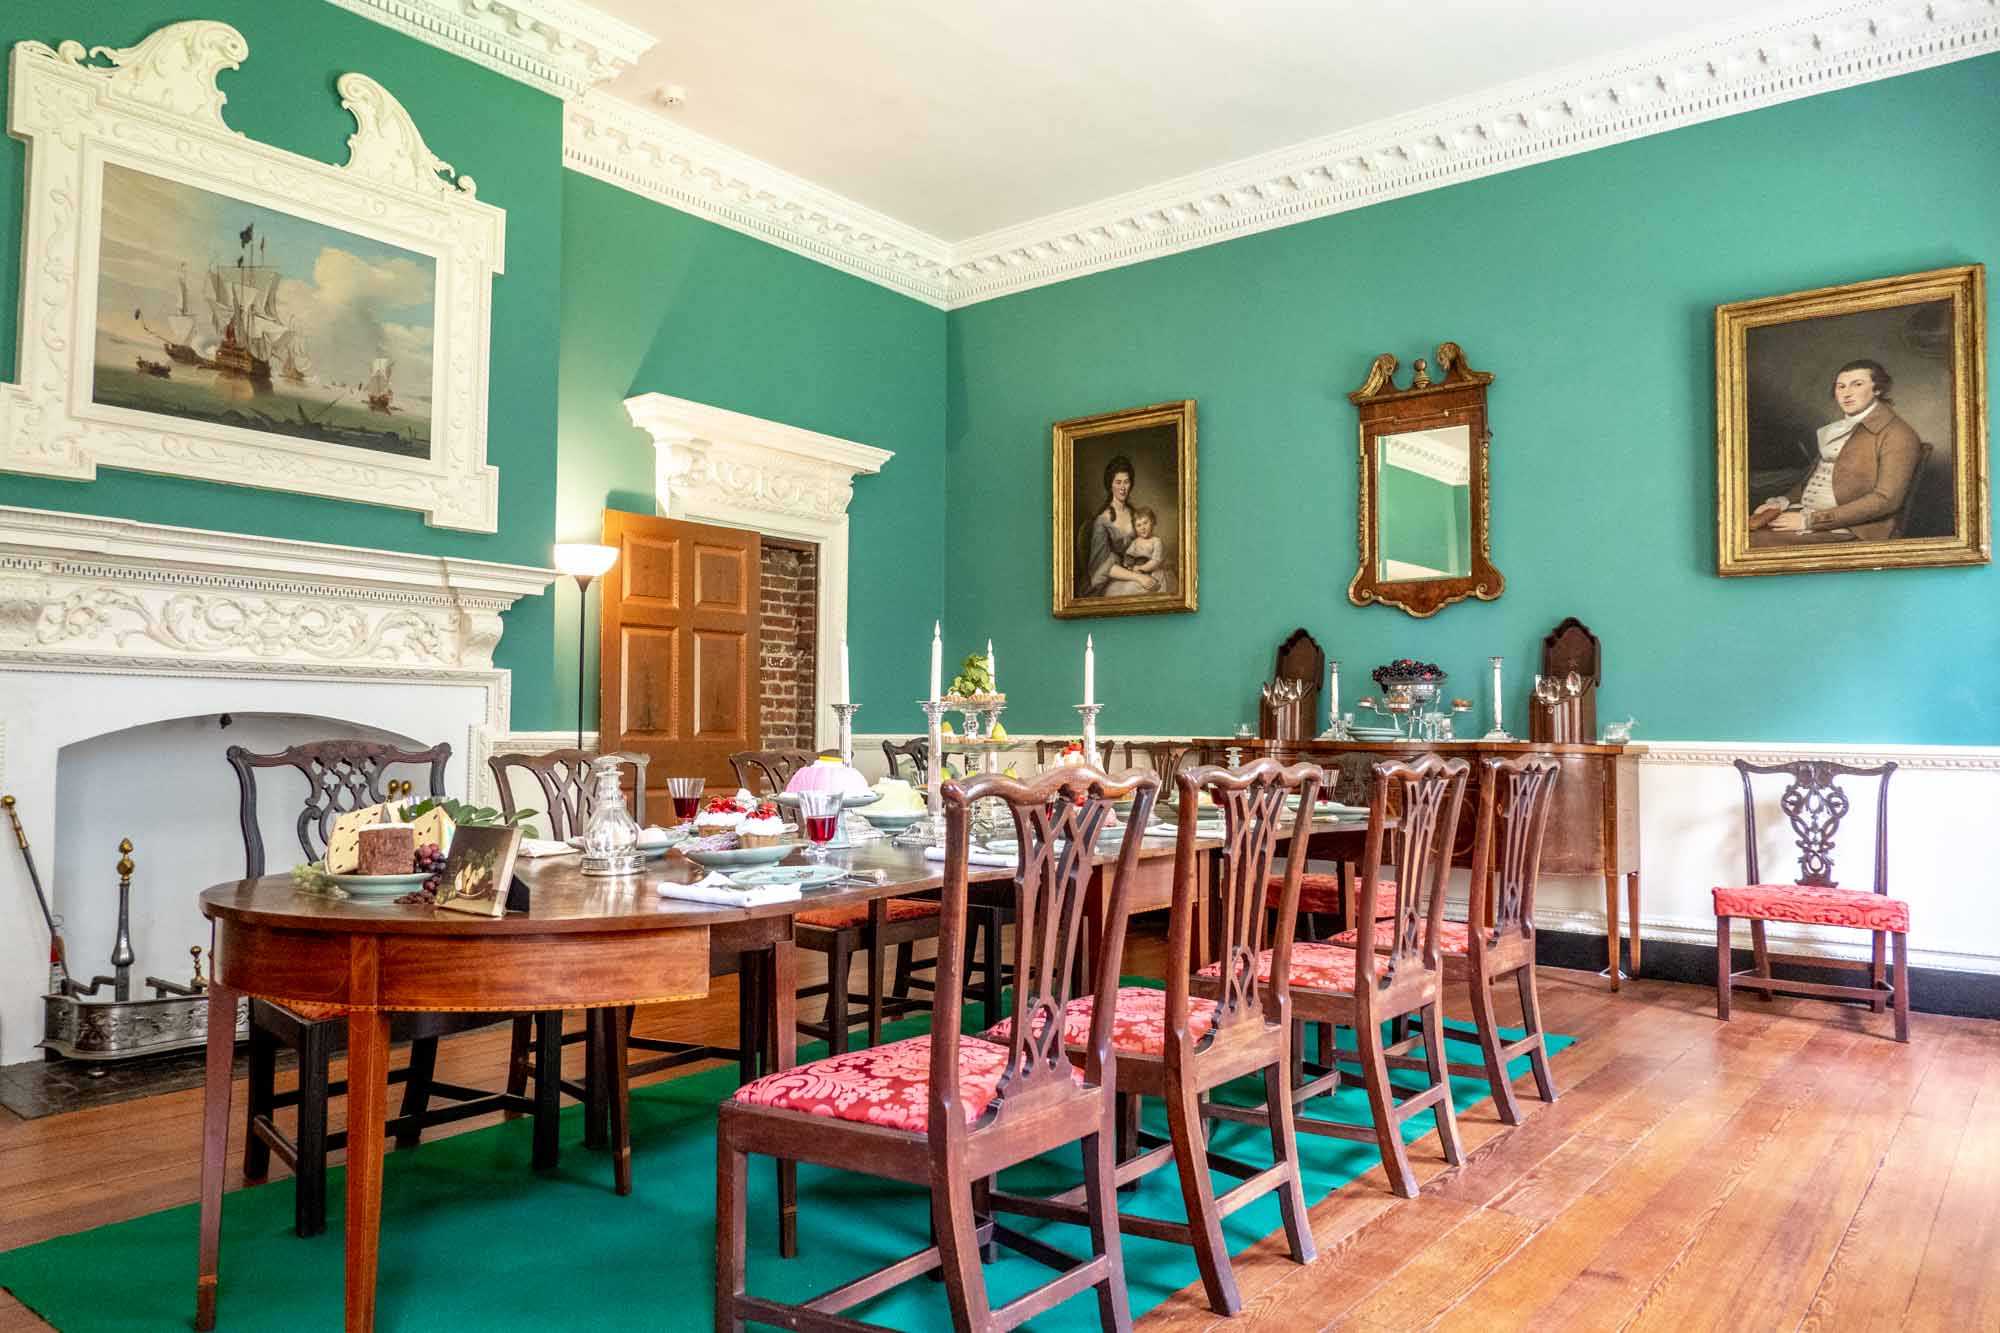 Dining room with portraits on its turquoise walls and formal dining table set for dinner.